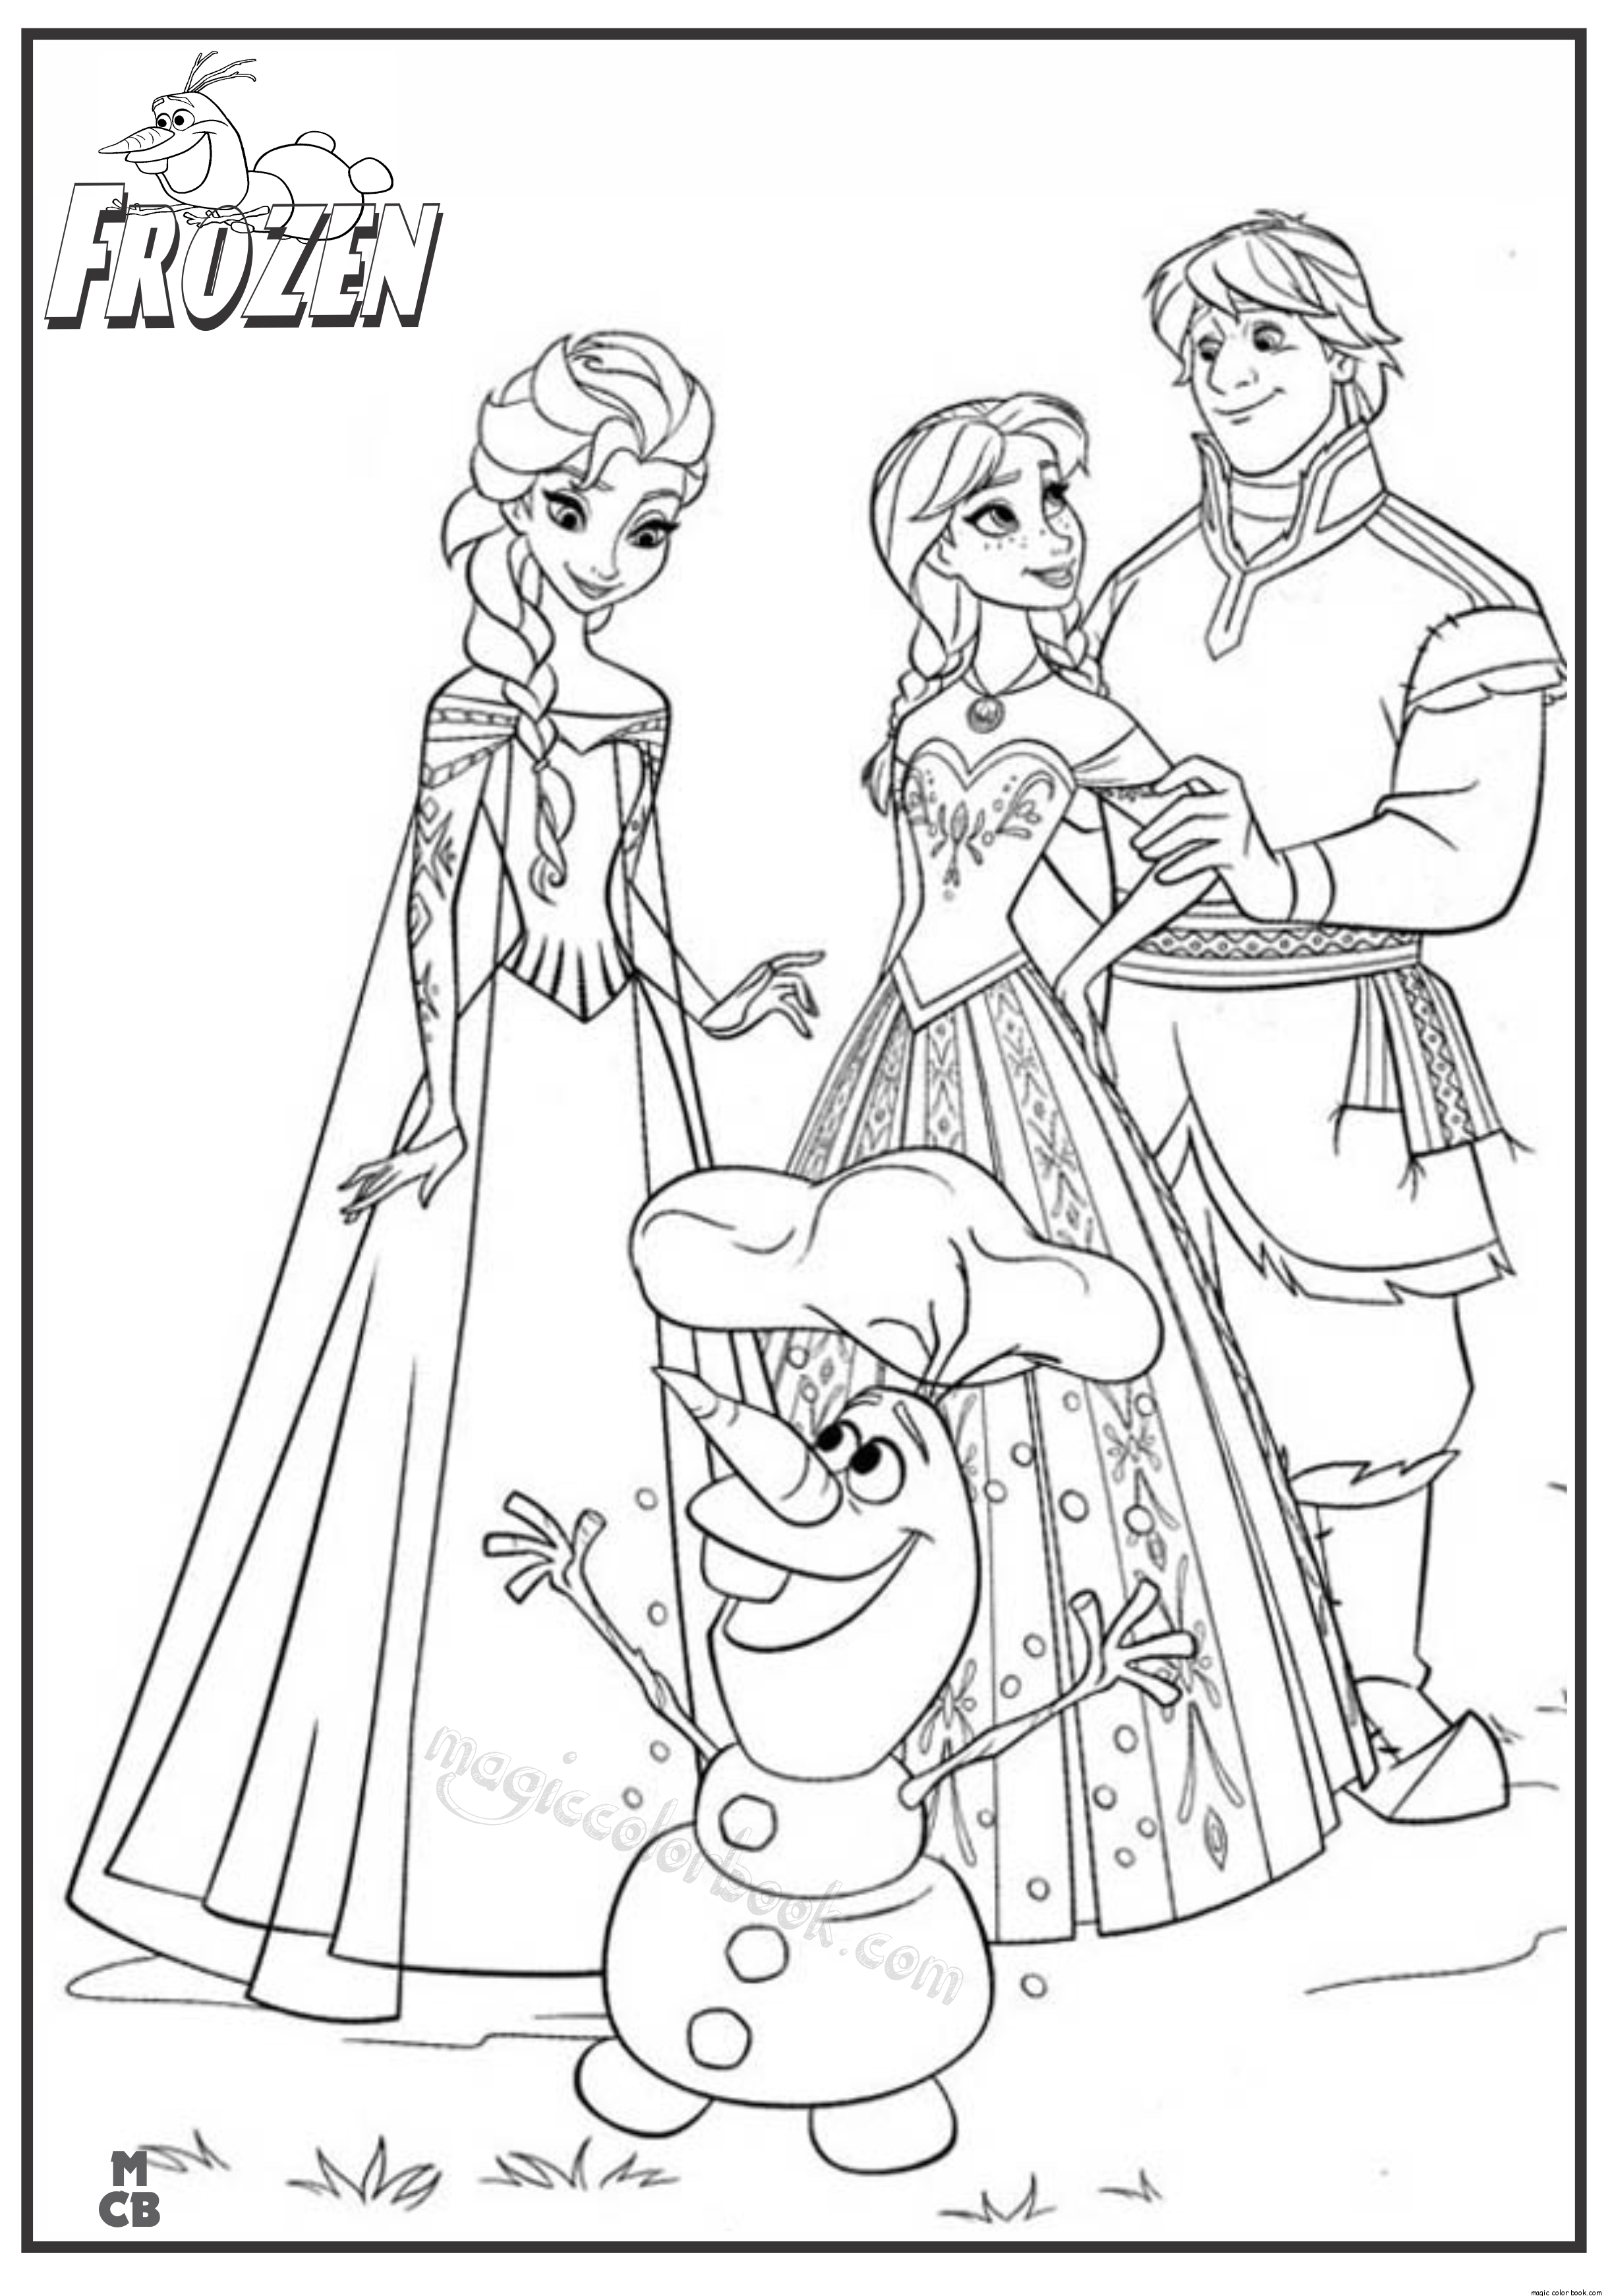 Frozen 27 For Kids Coloring Page